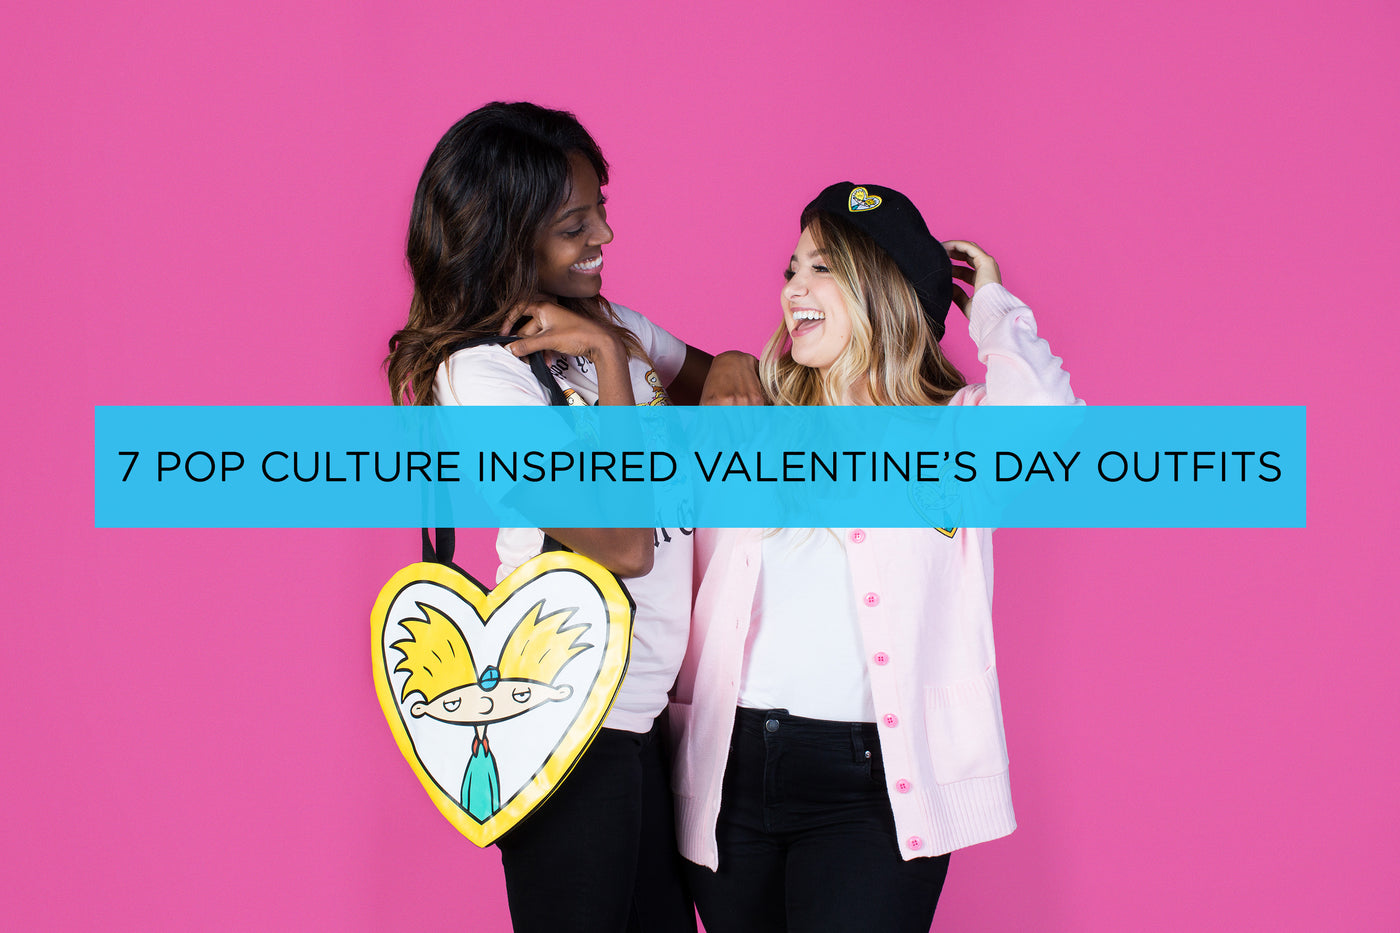 7 Pop Culture Inspired Valentine’s Day Outfits